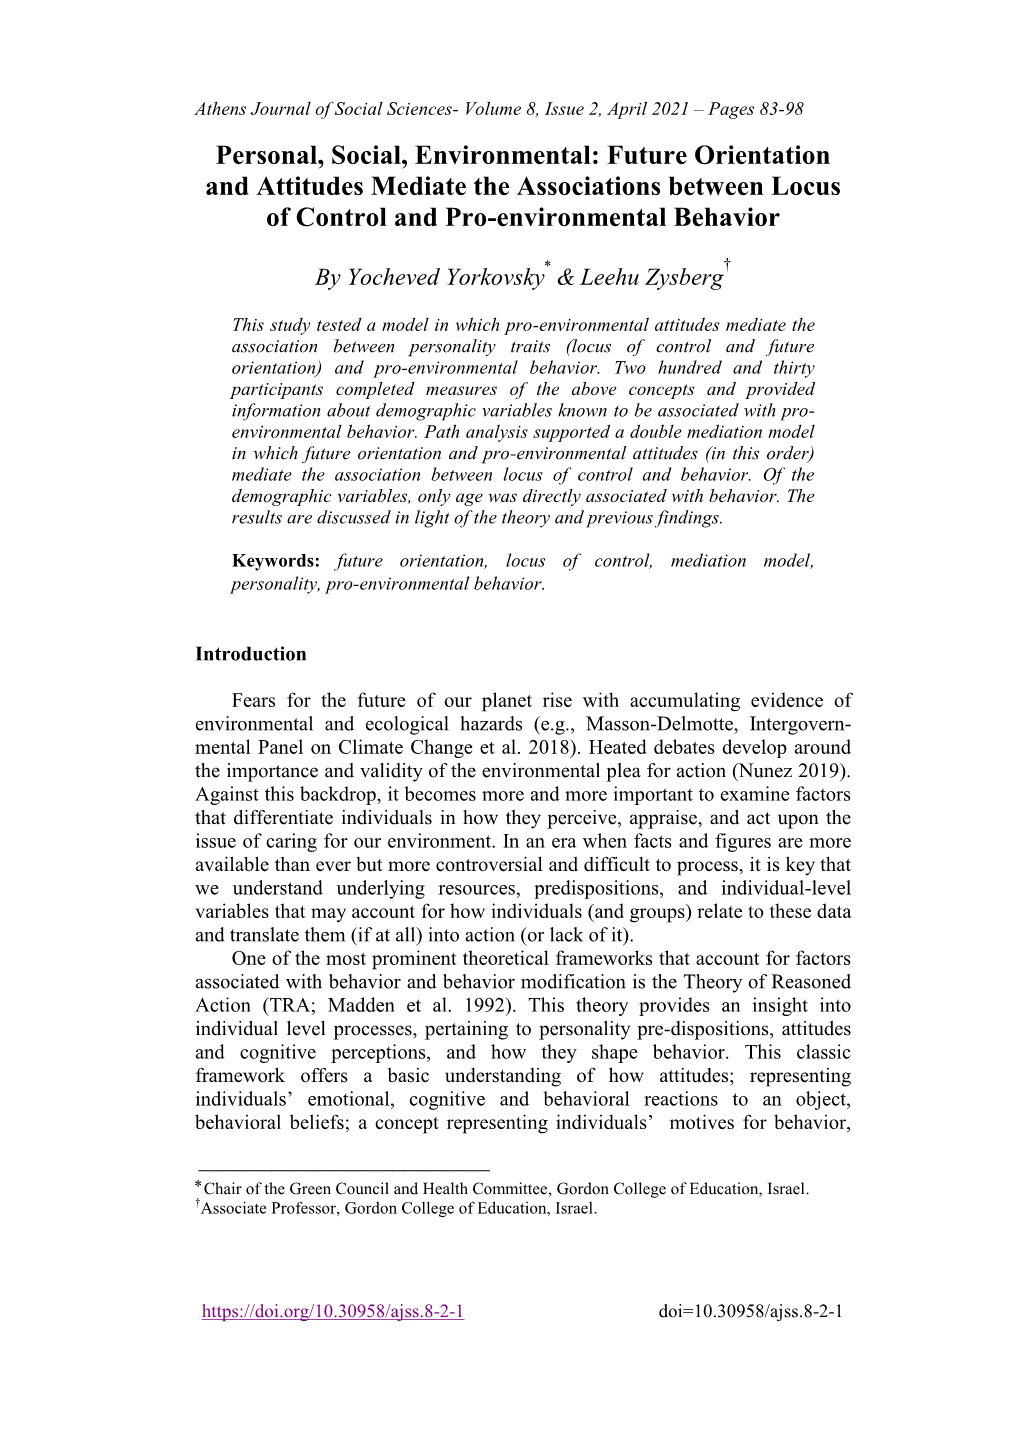 Personal, Social, Environmental: Future Orientation and Attitudes Mediate the Associations Between Locus of Control and Pro-Environmental Behavior